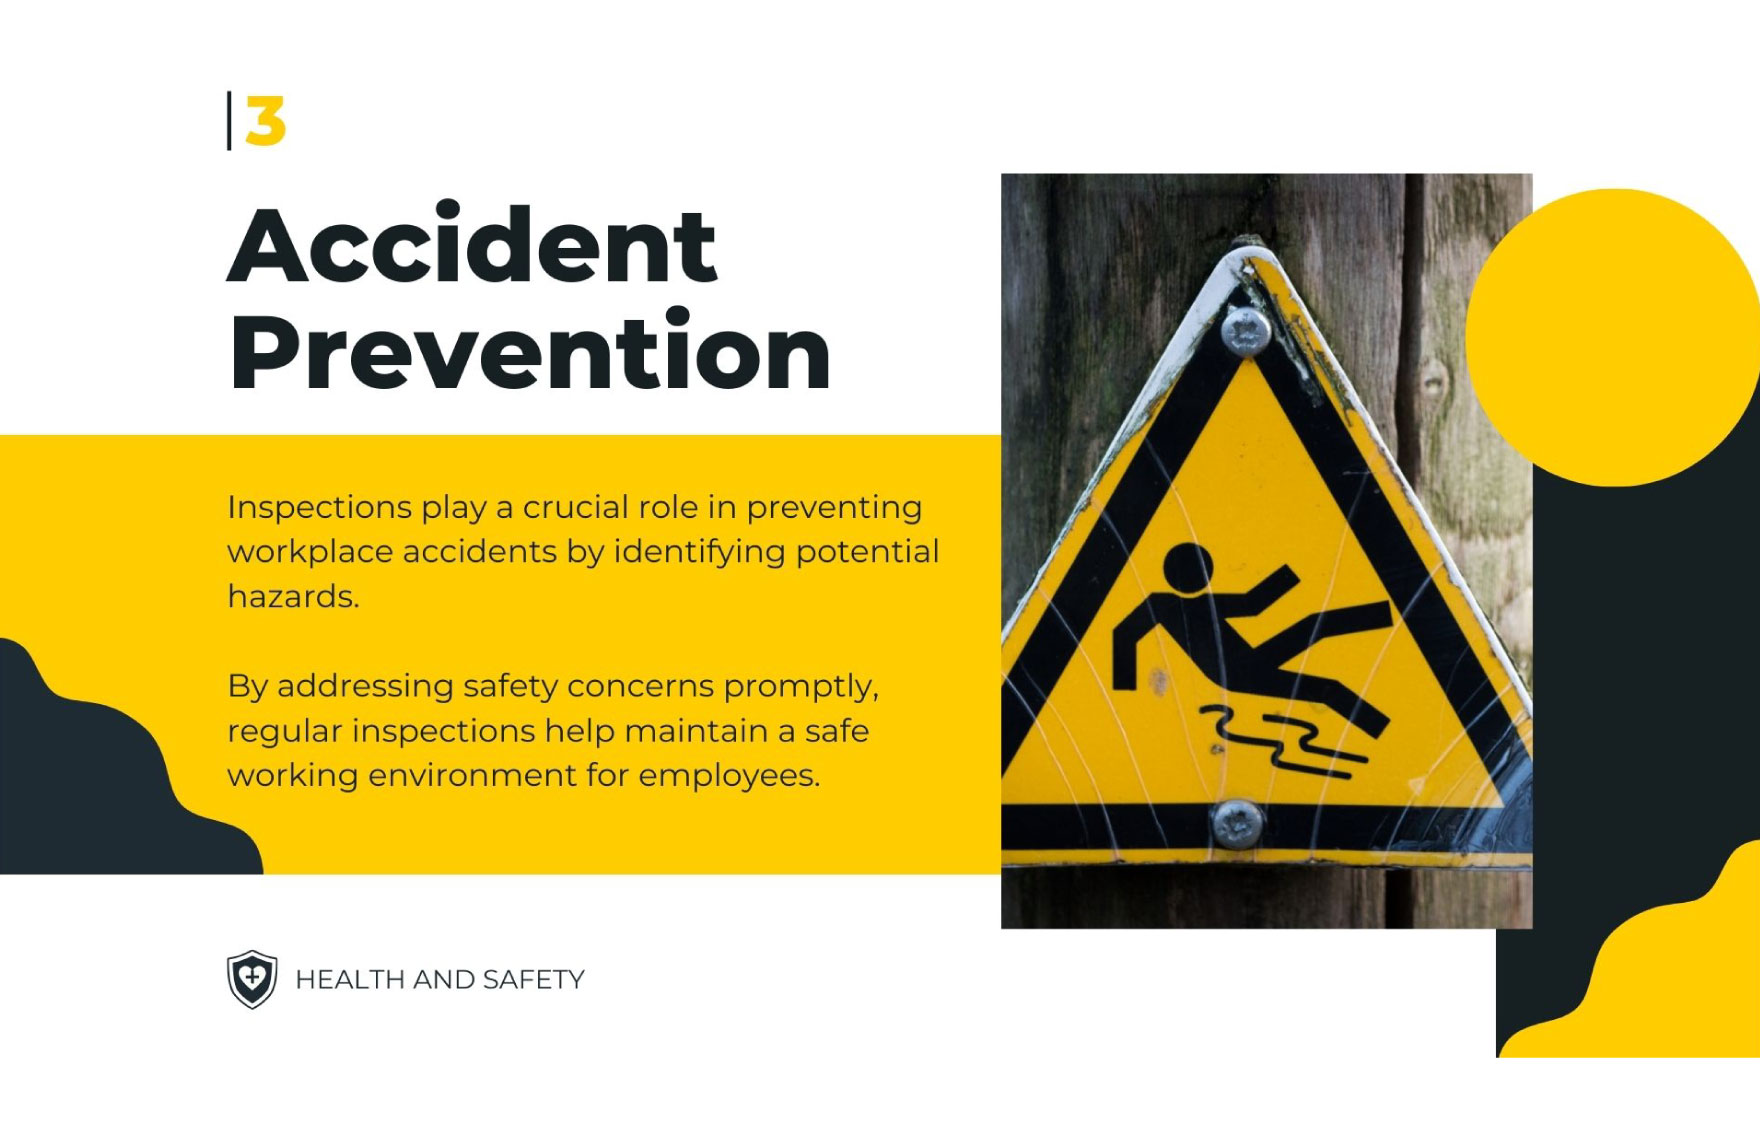 Health and Safety Inspection PPT Template